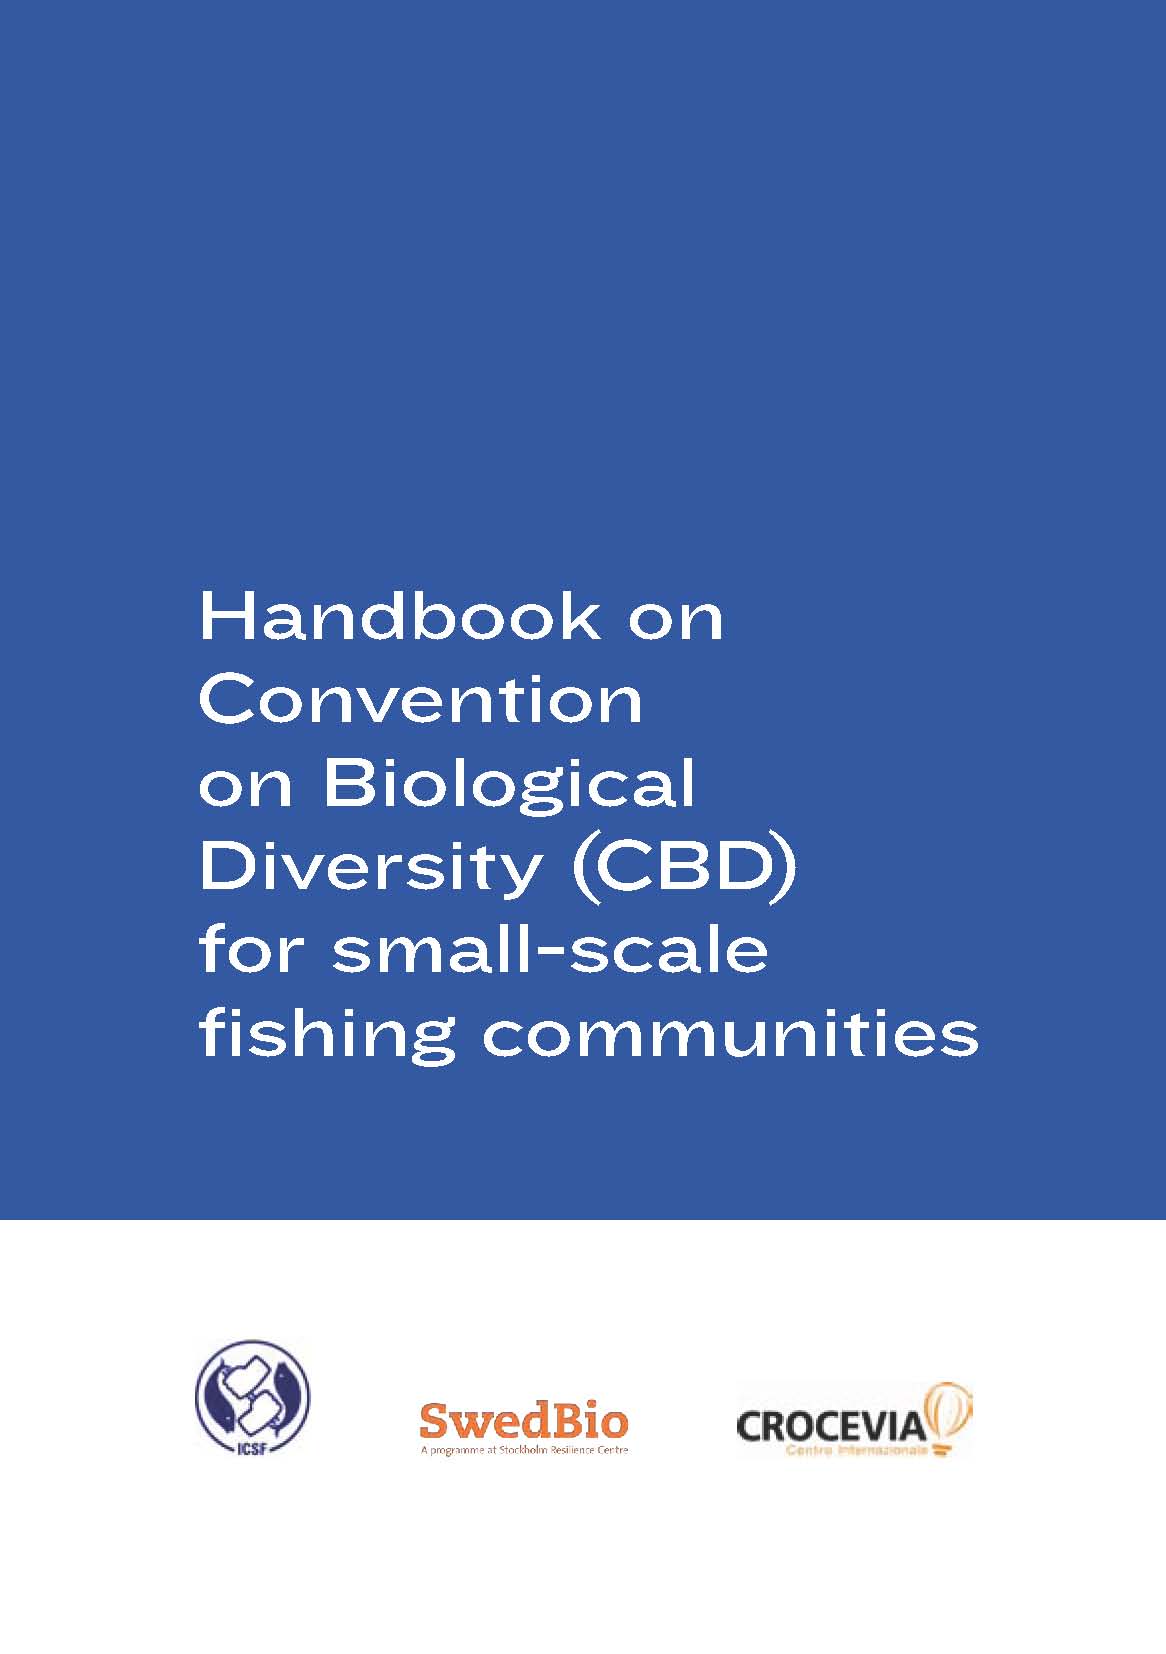 Handbook on Convention on Biological Diversity (CBD) for small-scale fishing communities